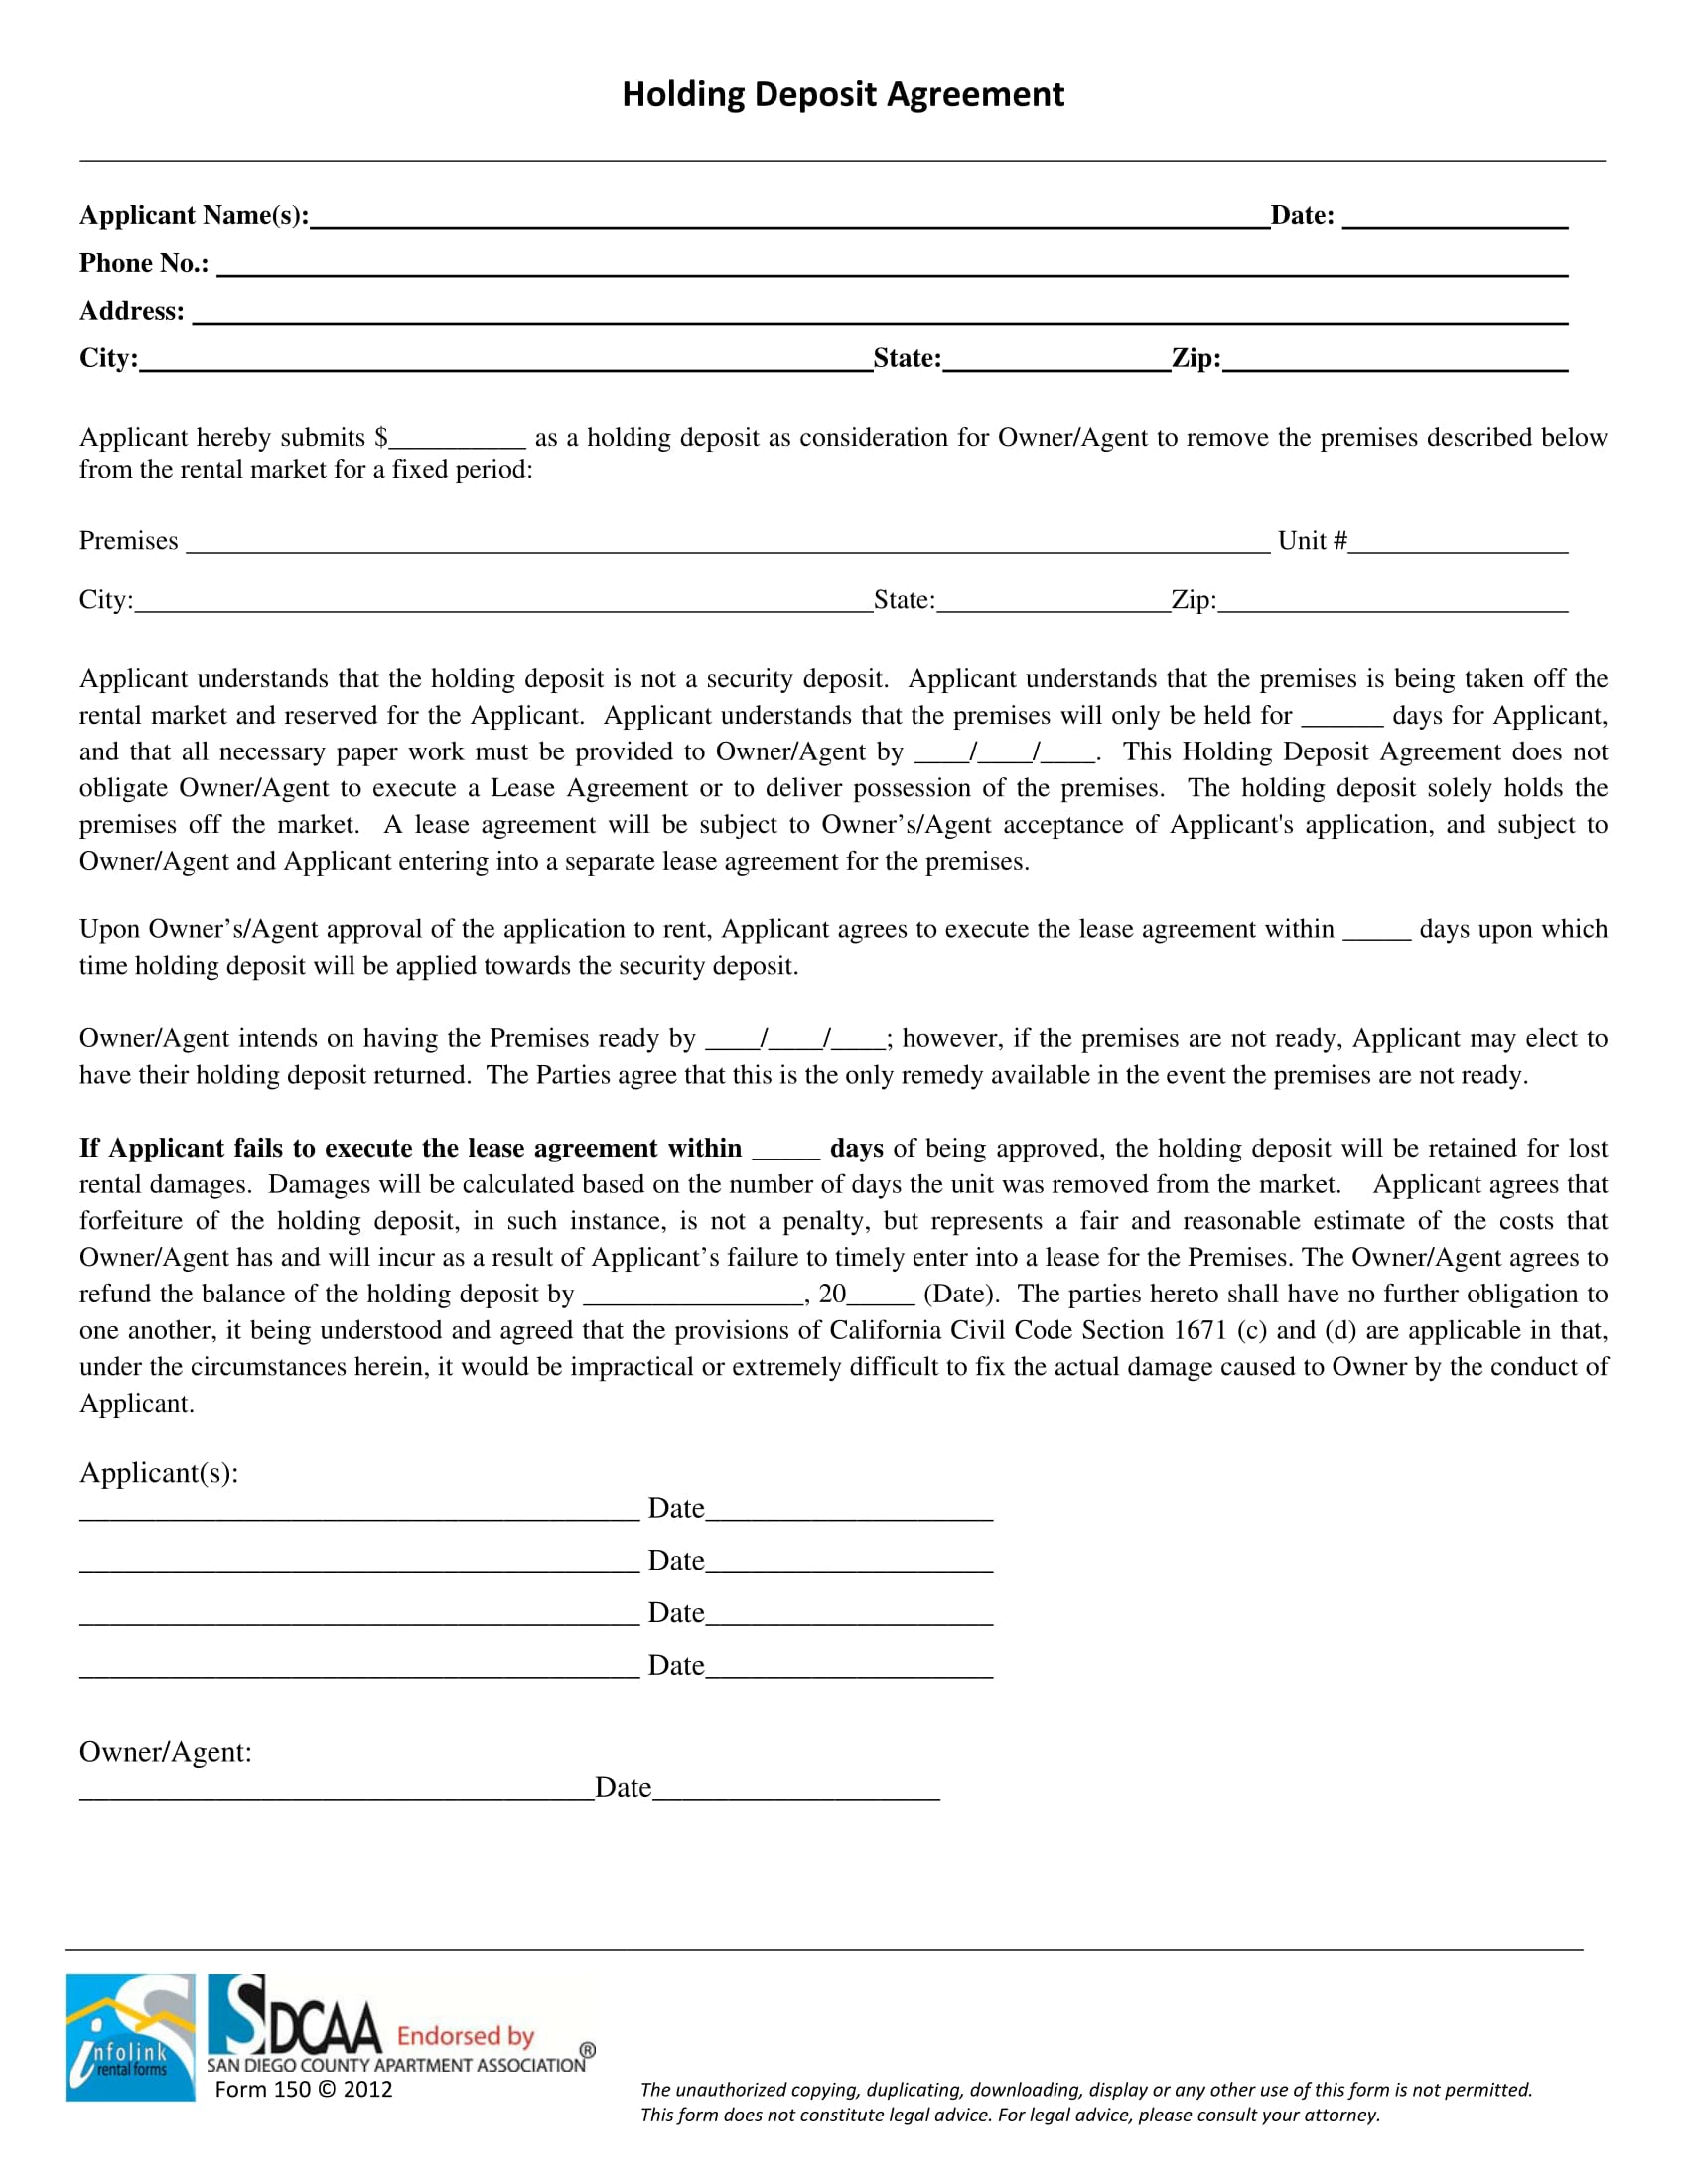 FREE 22+ Landlord Forms [ Agreements, Notice , Eviction , Deposit ] For holding deposit agreement template